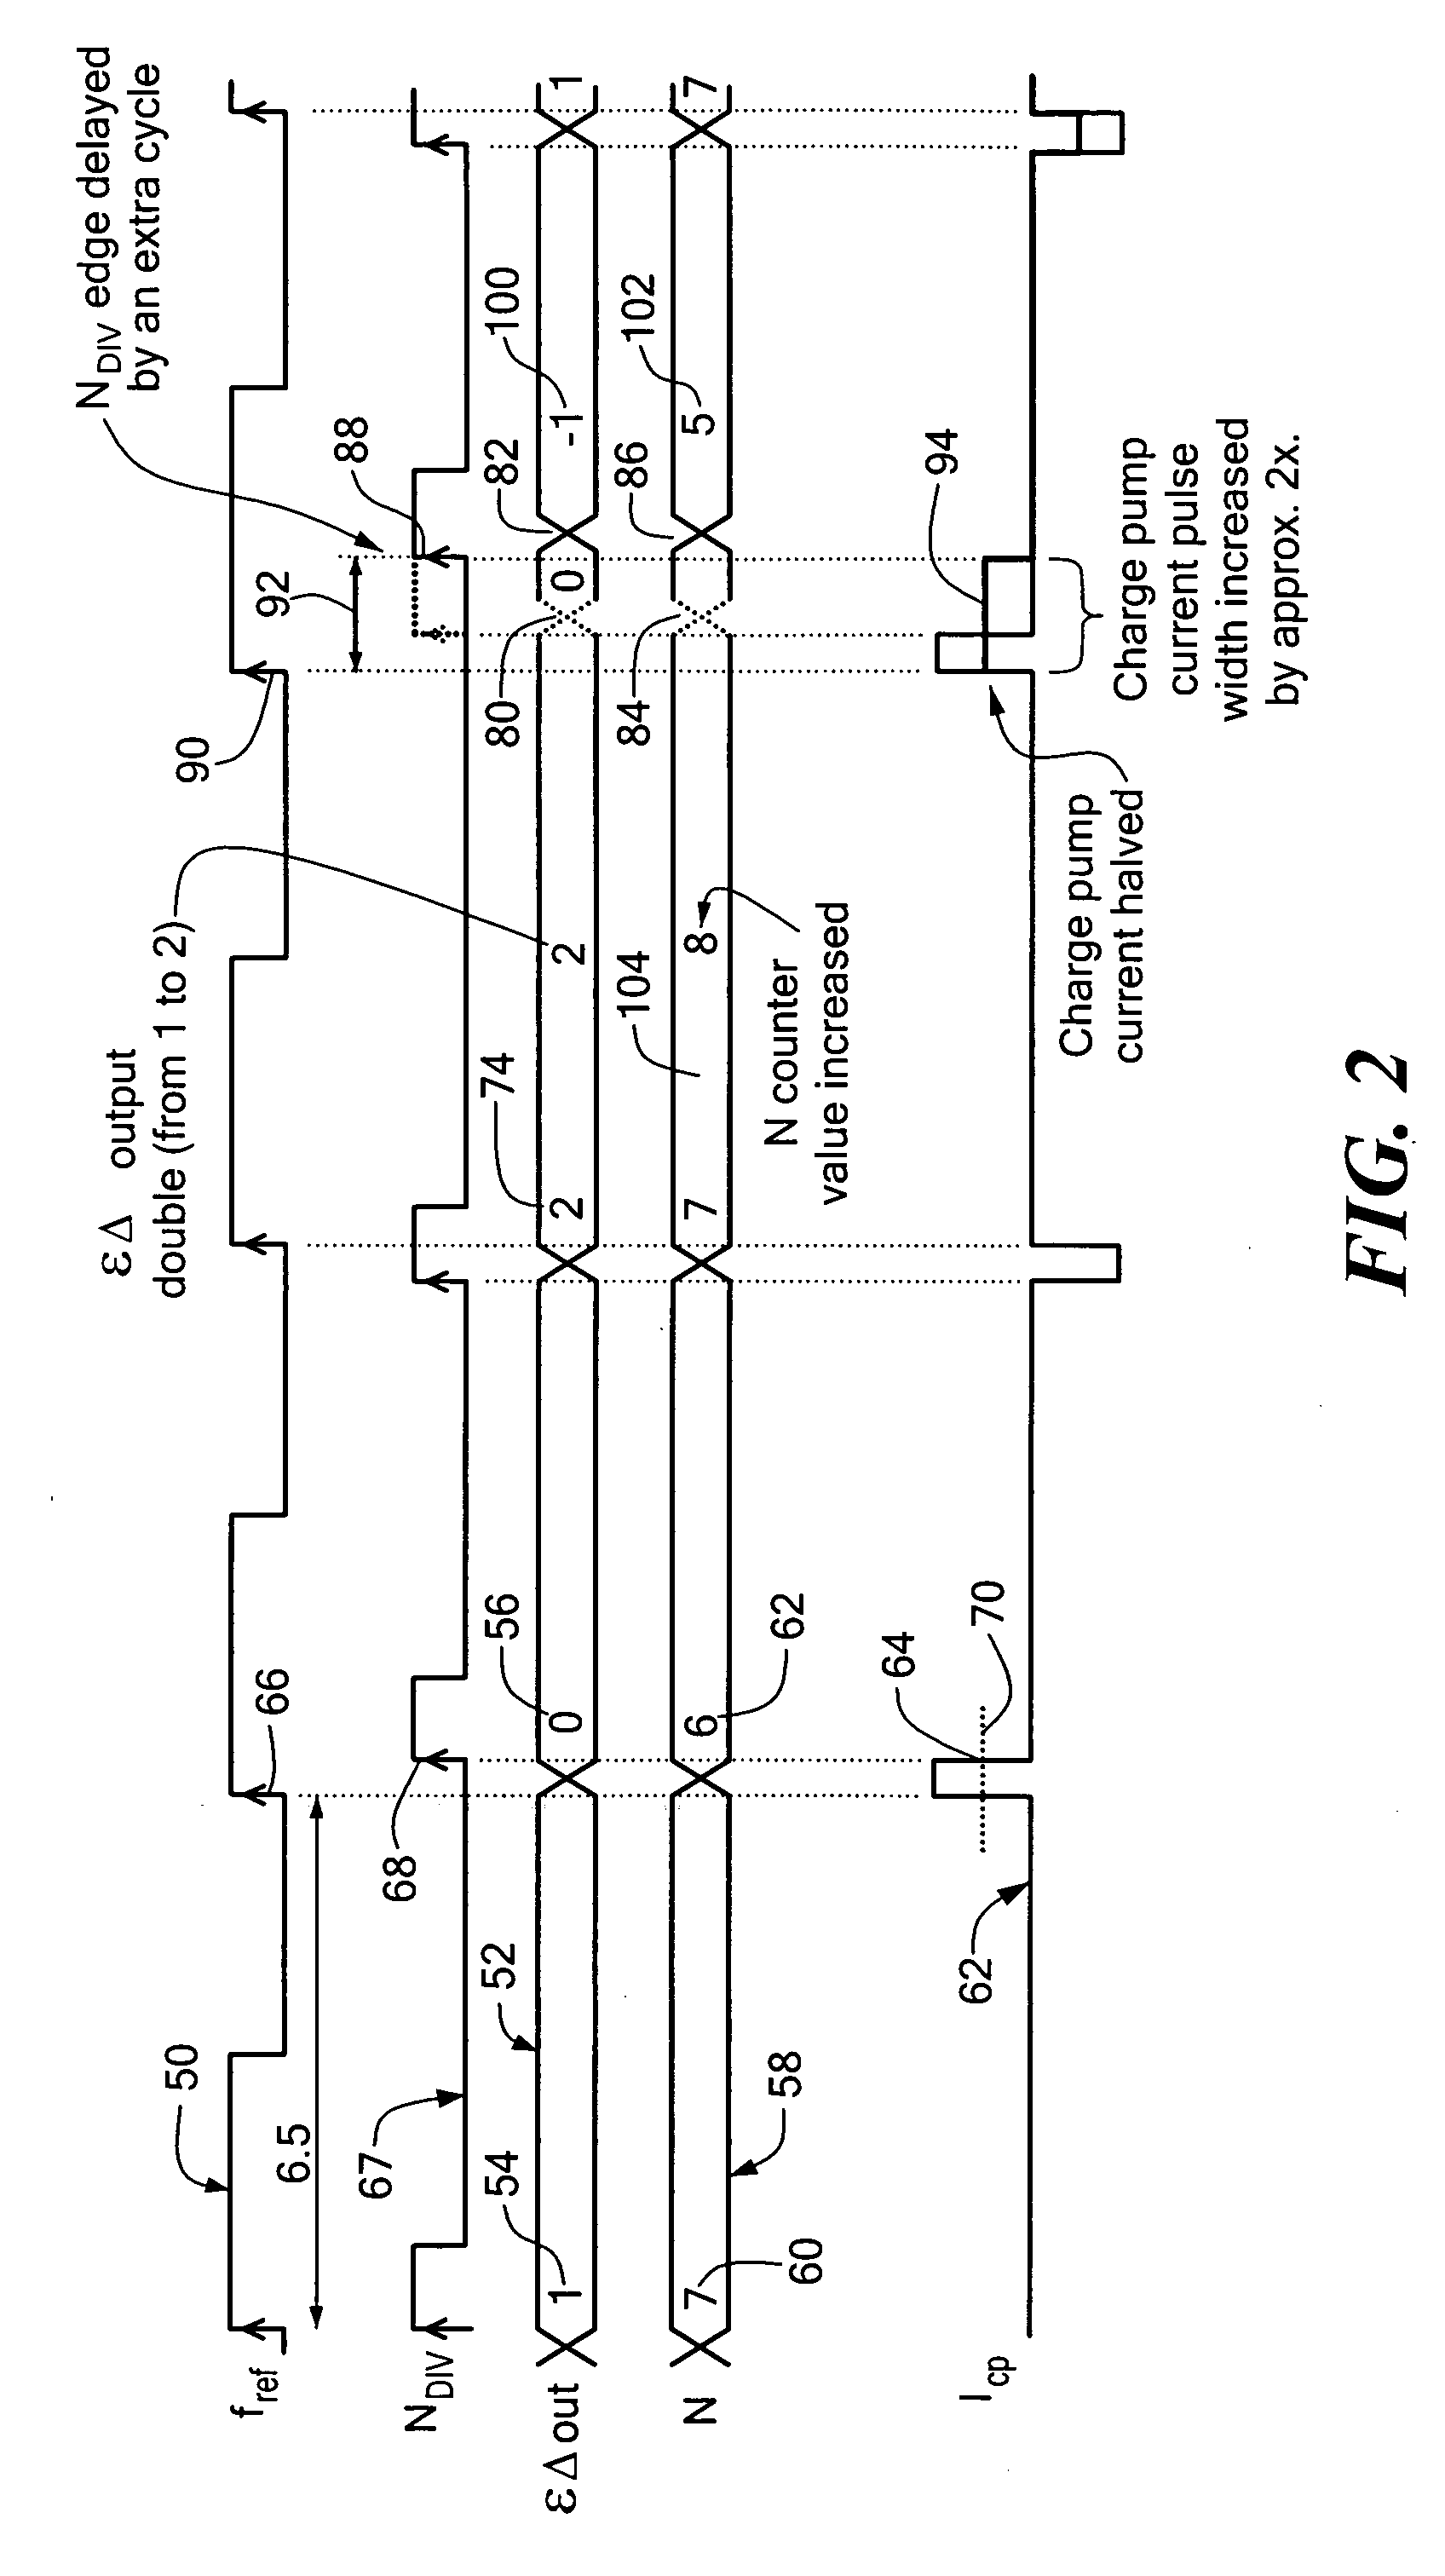 Gain compensated fractional-N phase lock loop system and method